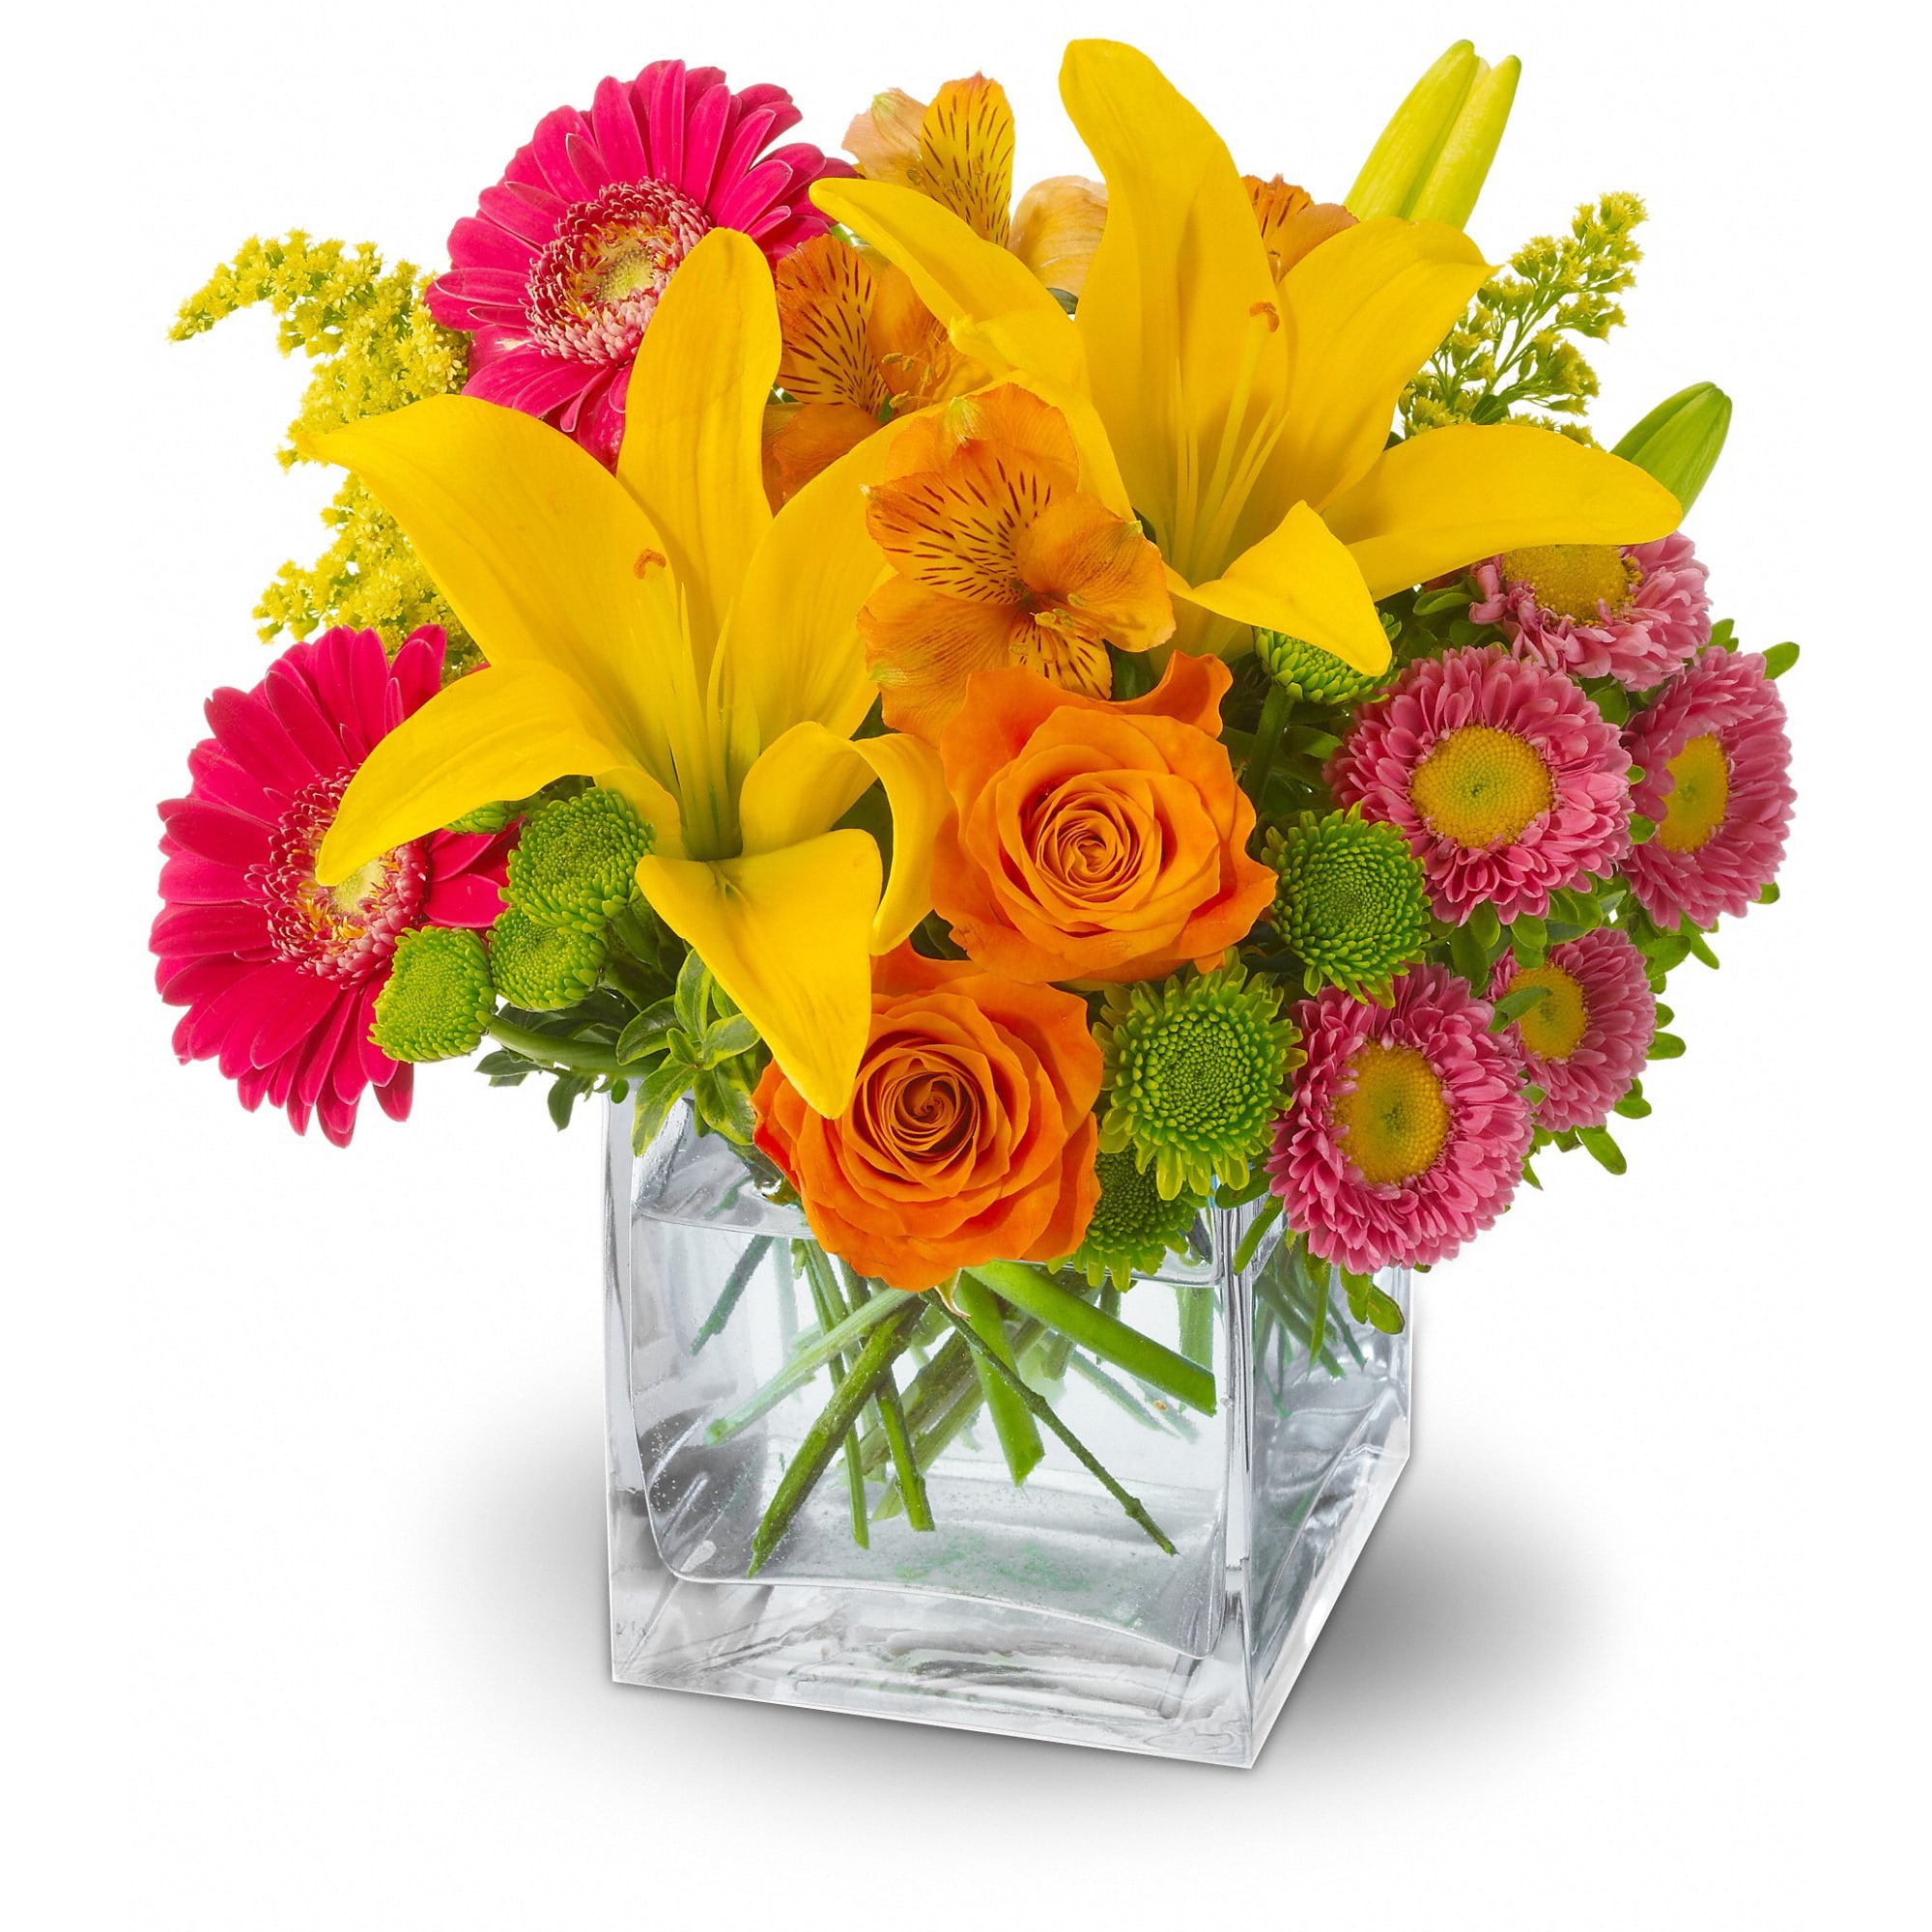 Teleflora's Summertime Splash - Make a summertime splash with this pop art mix of yellow, hot pink, orange and green blossoms, presented in a modern glass cube vase - and bring warm-weather fun to someone's day!  